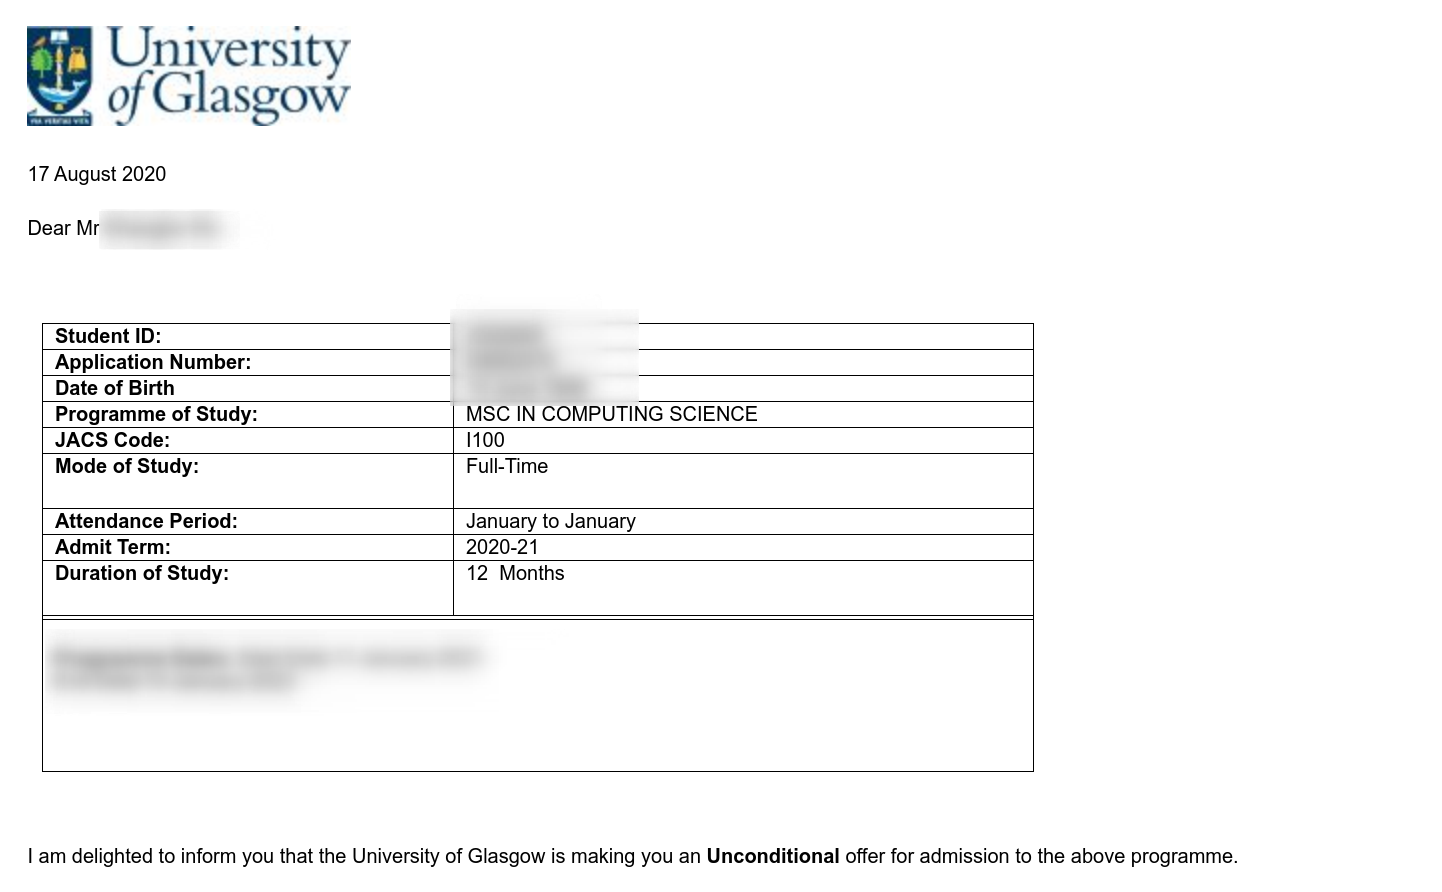 Unconditional Offer from UofG